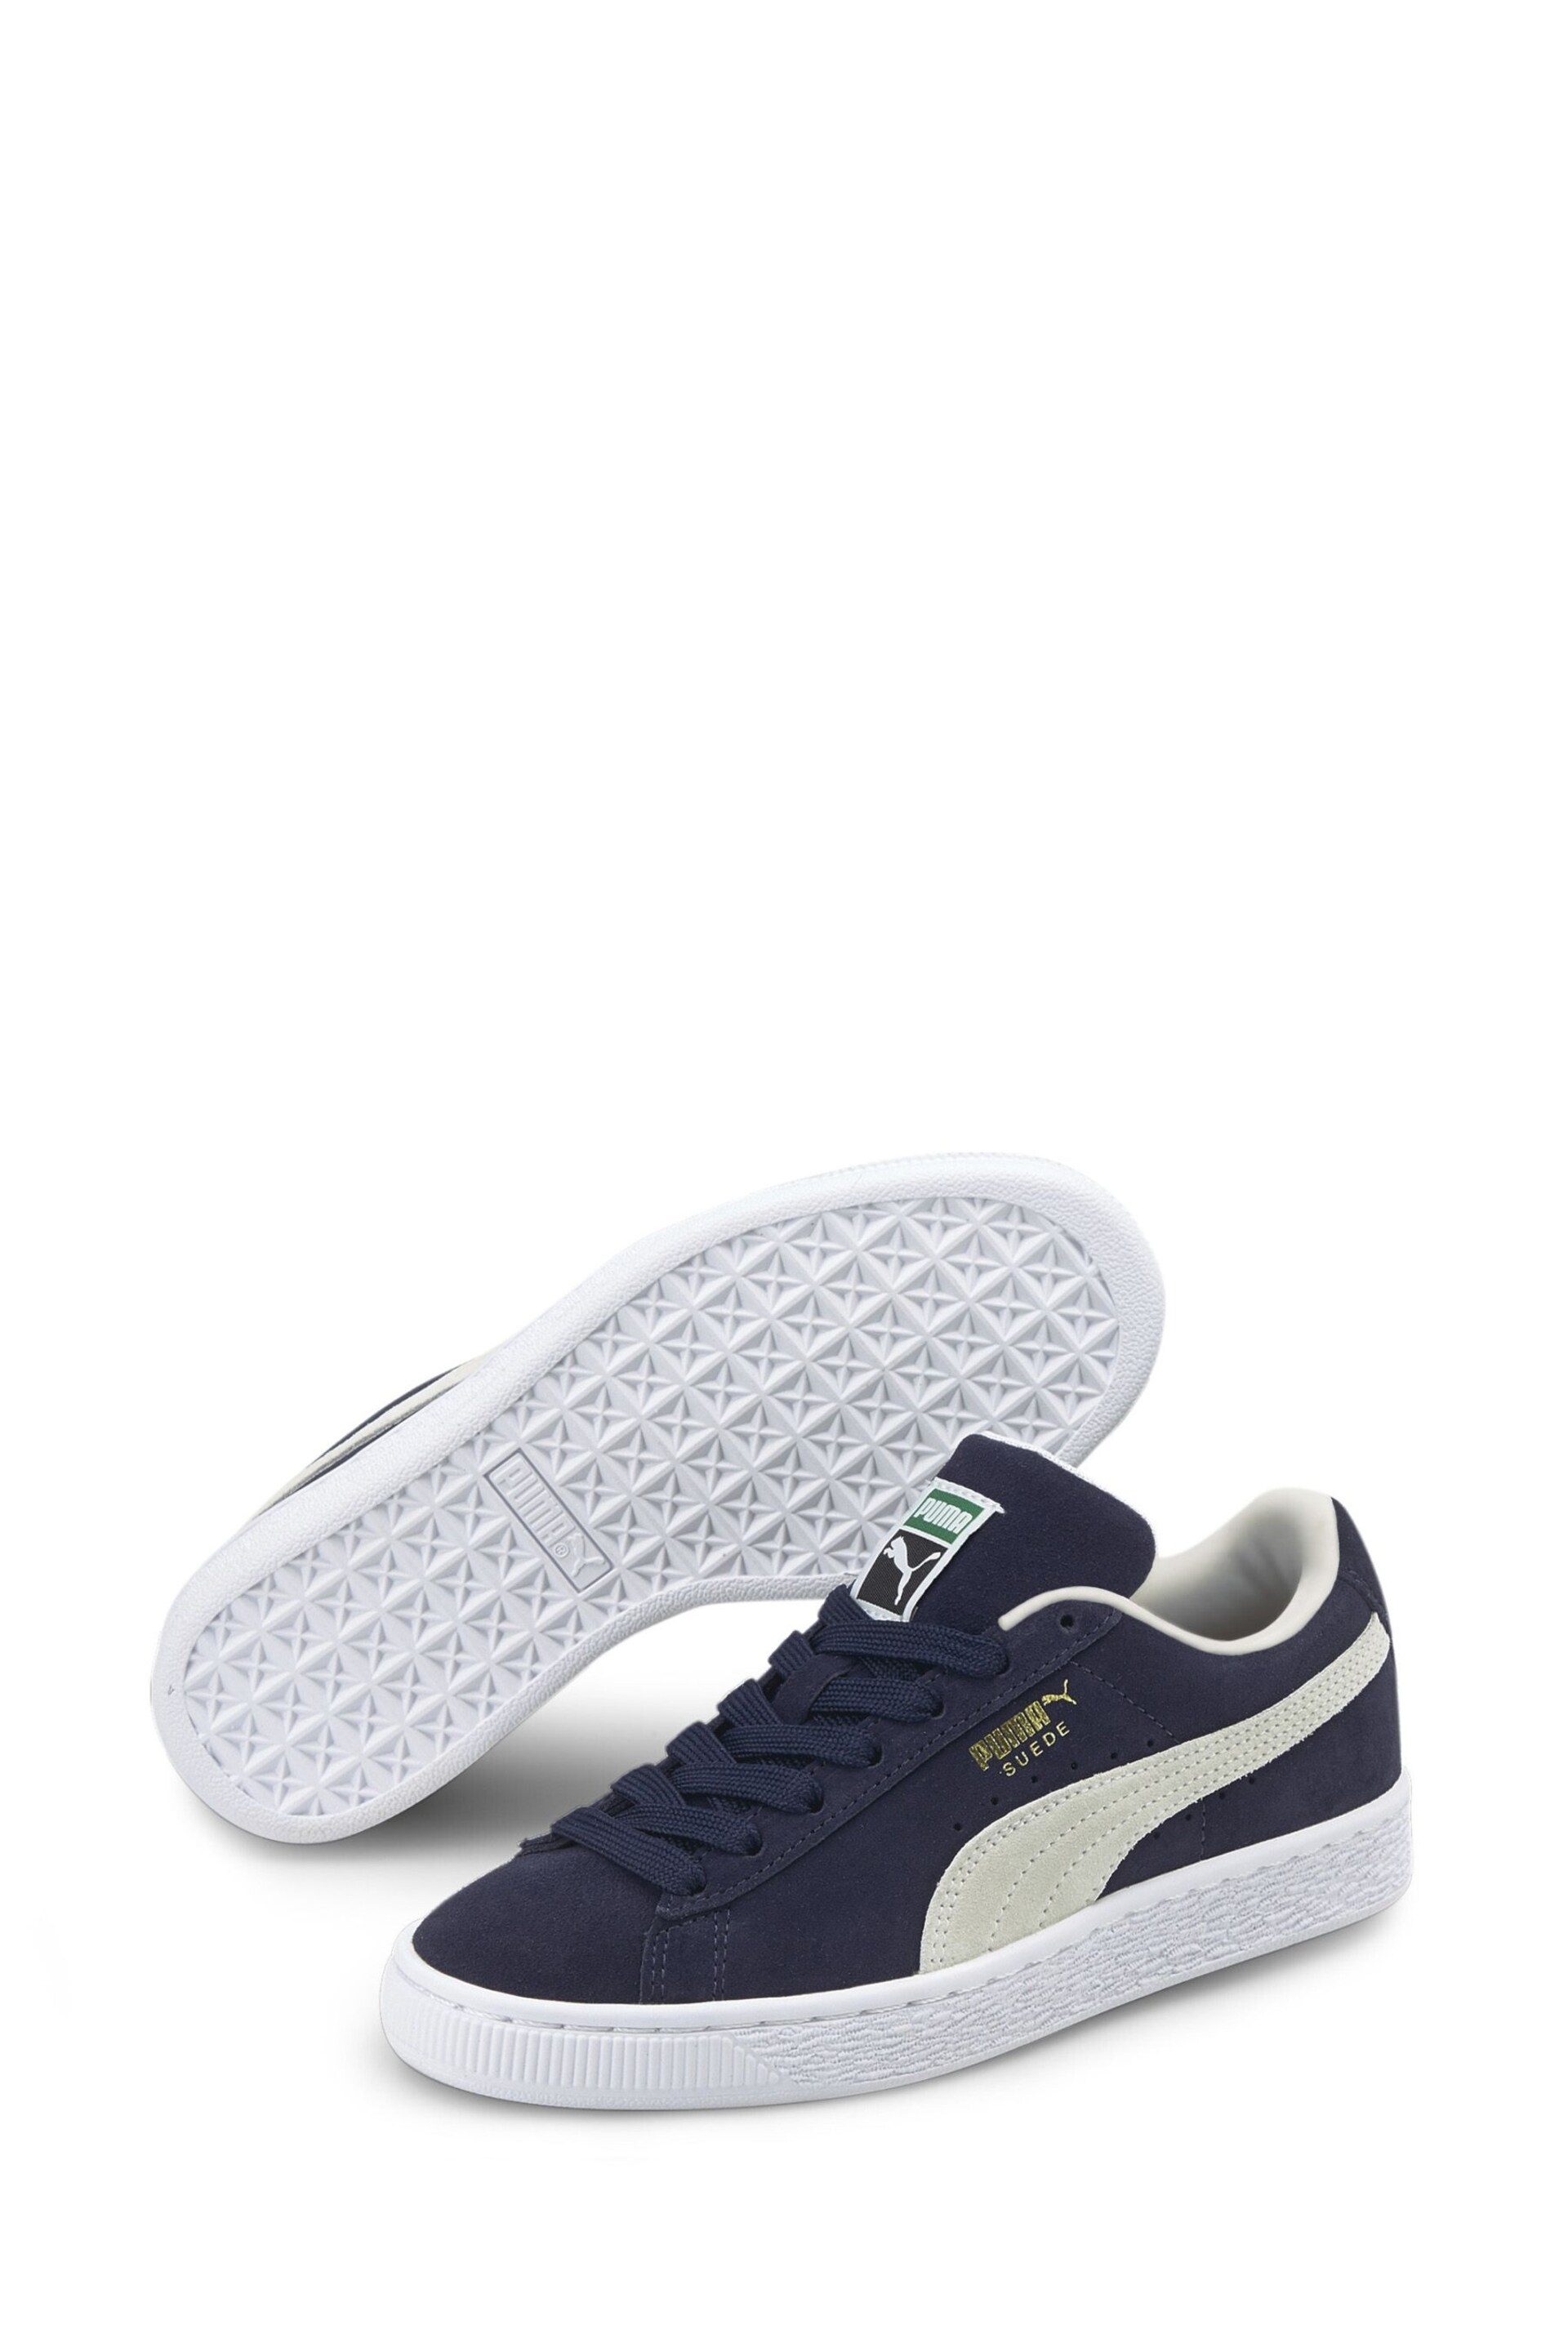 Puma Blue Suede Classic XXI Youth Trainers - Image 3 of 6